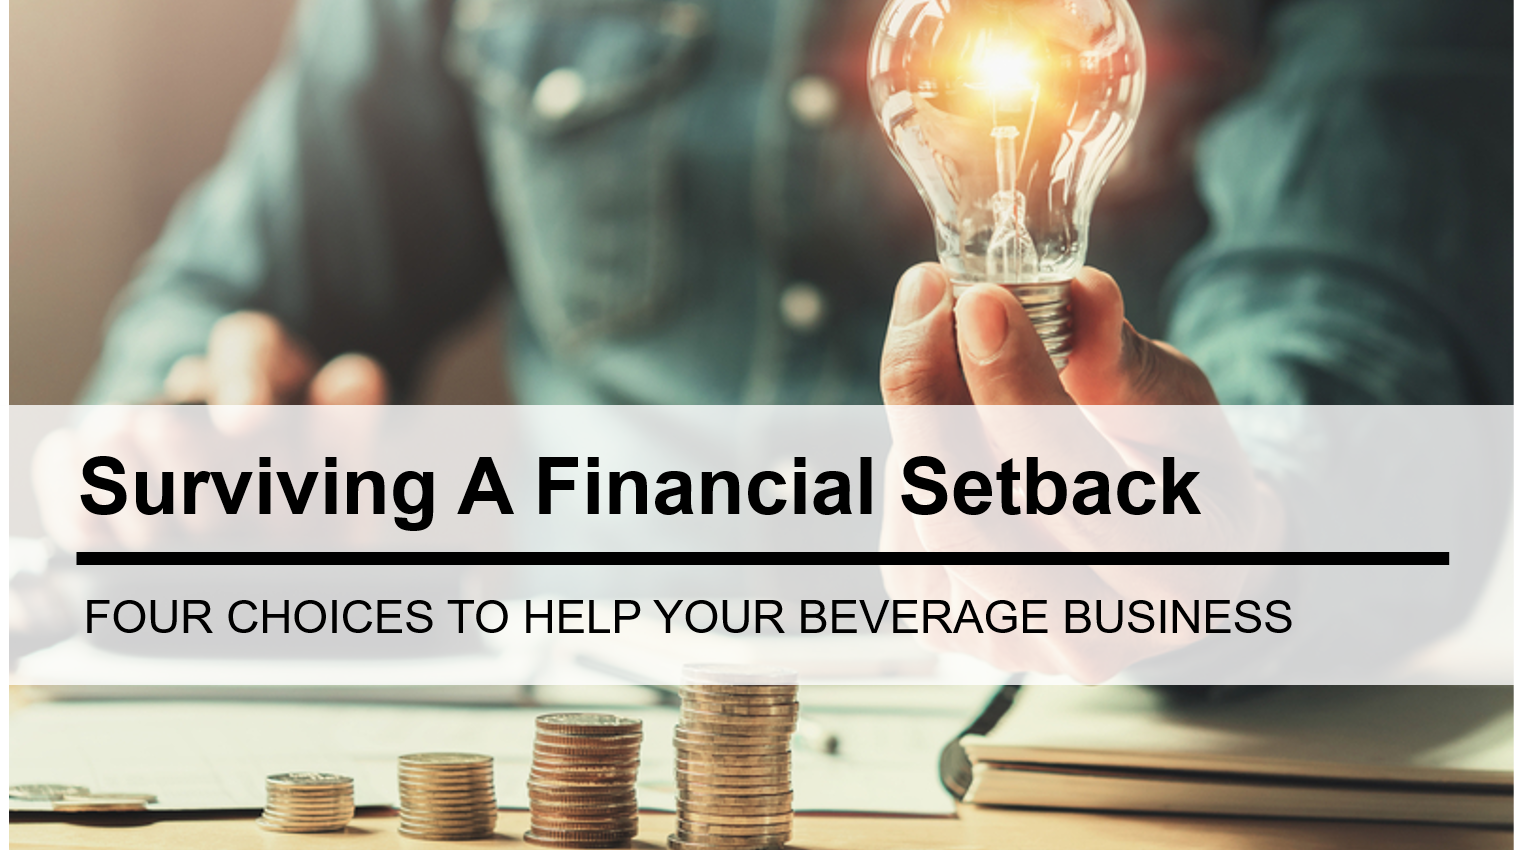 Choices That Will Help You Survive A Financial Setback In Your Beverage Business